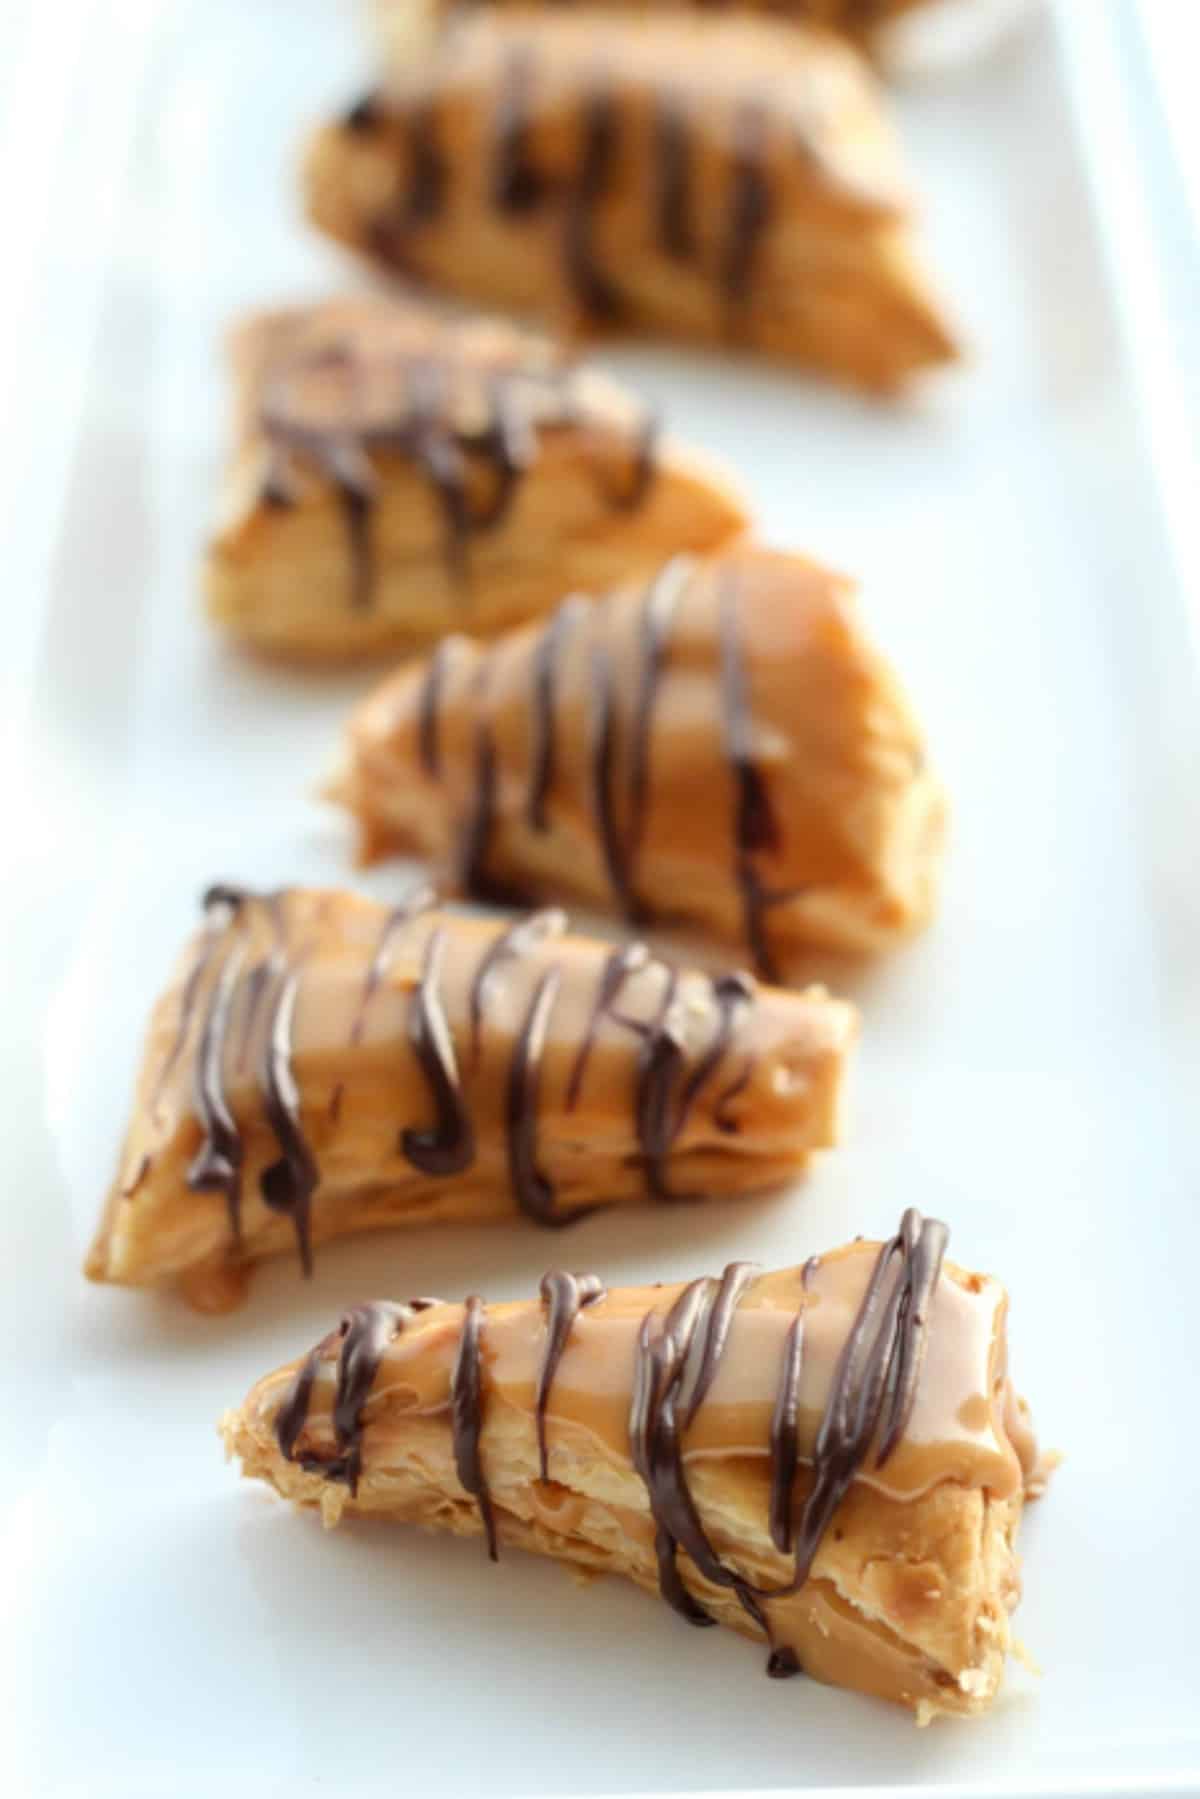 Puff pastry triangles with dulce de leche cream and chocolate drizzle on a platter.